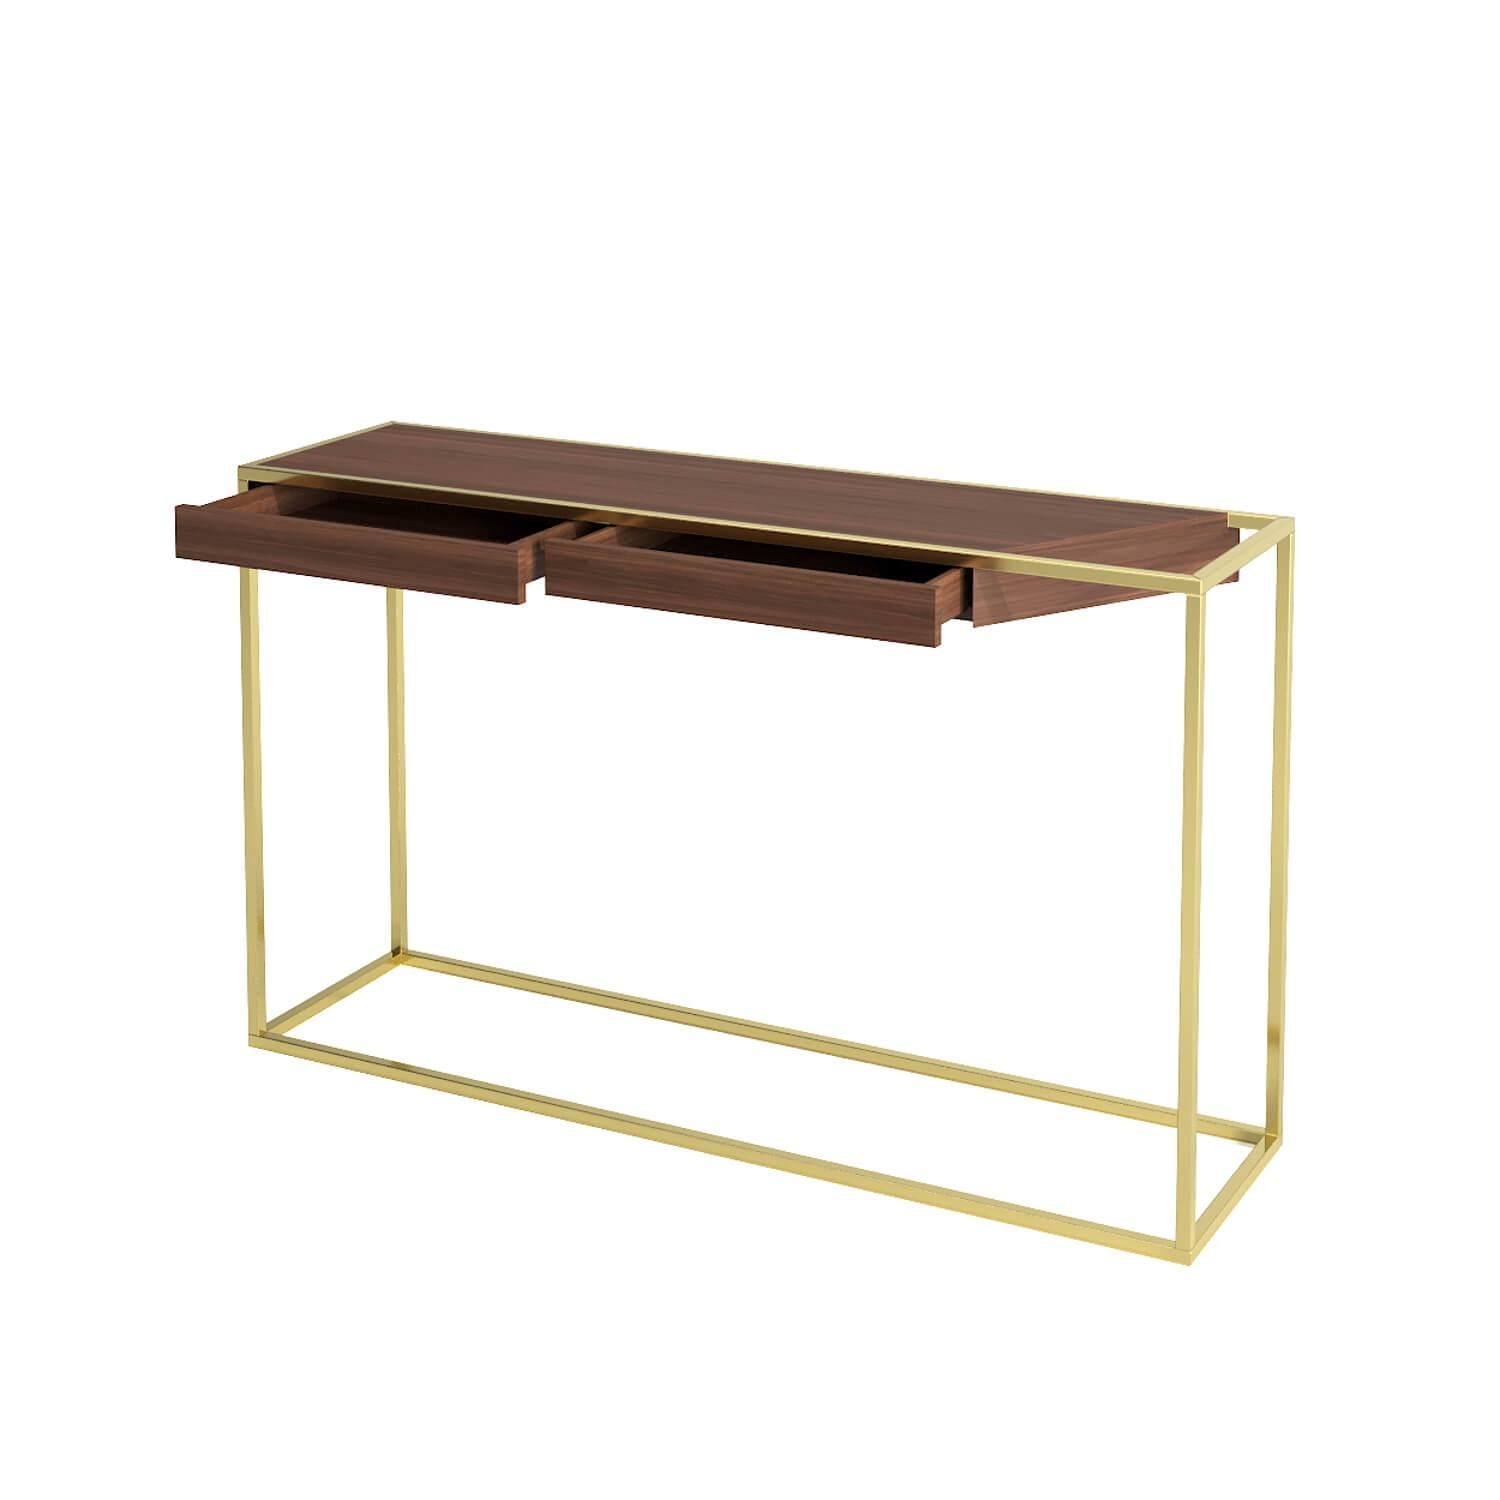 Modern Minimalist Rectangular Console Table Oak Wood and Brushed Stainless Steel For Sale 6